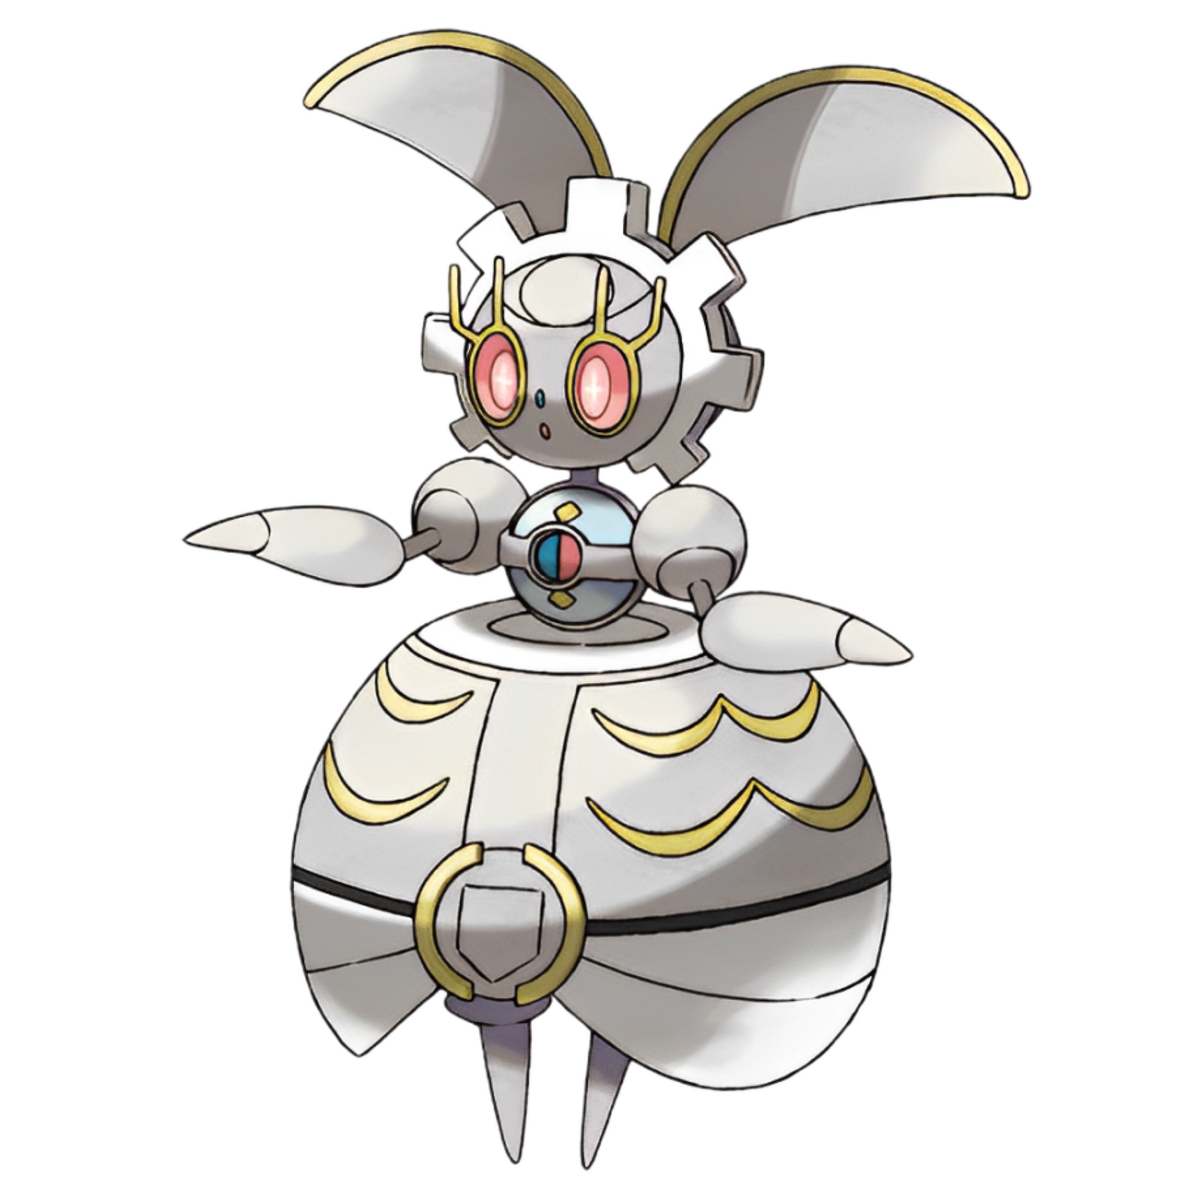 Solgaleo - Evolutions, Location, and Learnset